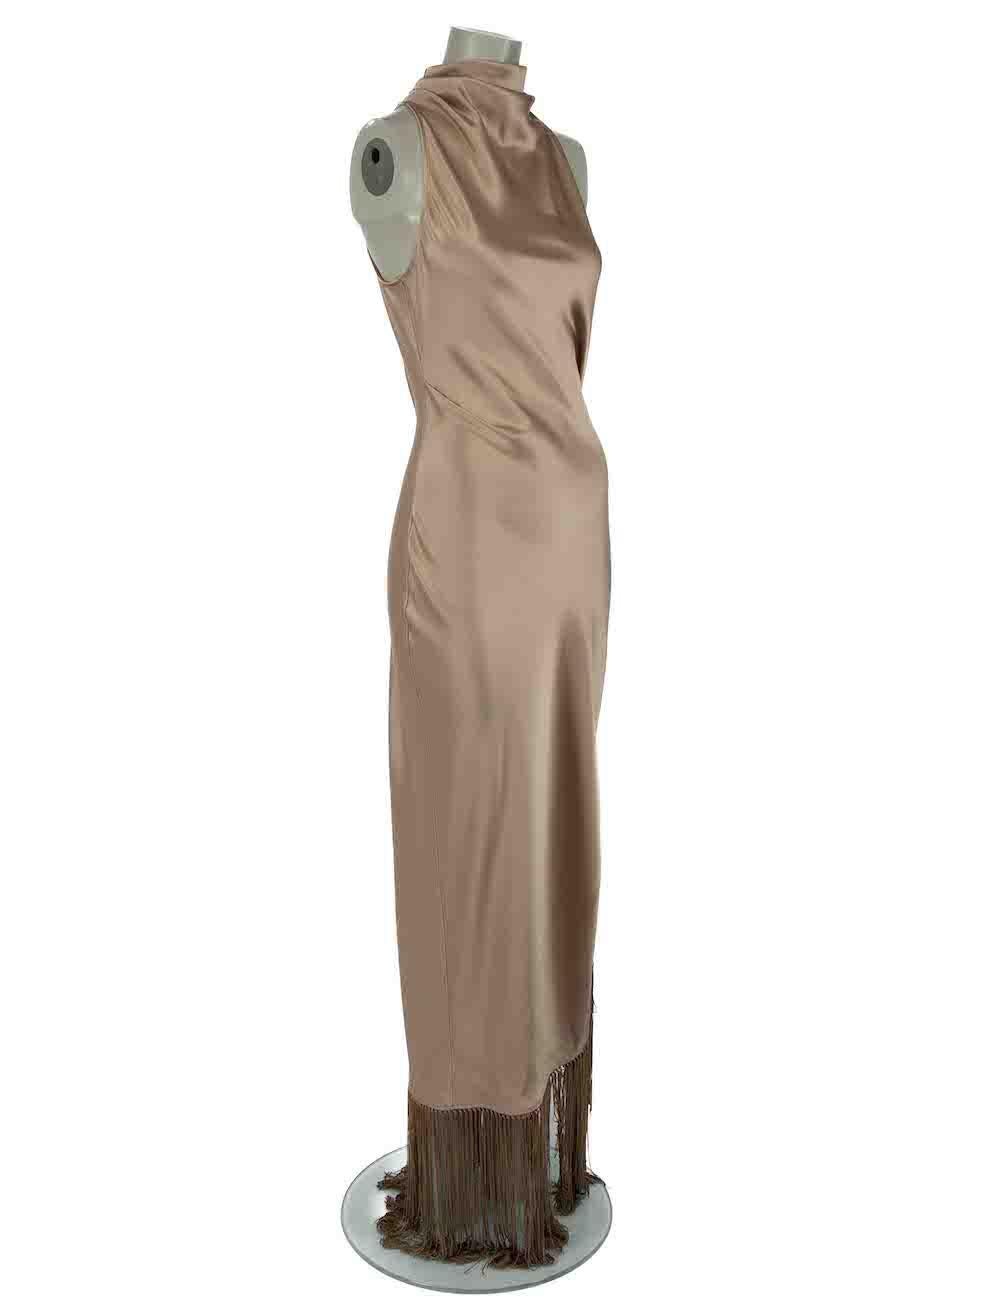 CONDITION is Very good. Minimal wear to dress is evident. Minimal wear to fabric finish with single pull to the weave and small discoloured mark found on this used Nanushka designer resale item.

Details
Beige
Synthetic
Dress
Sleeveless
Mock